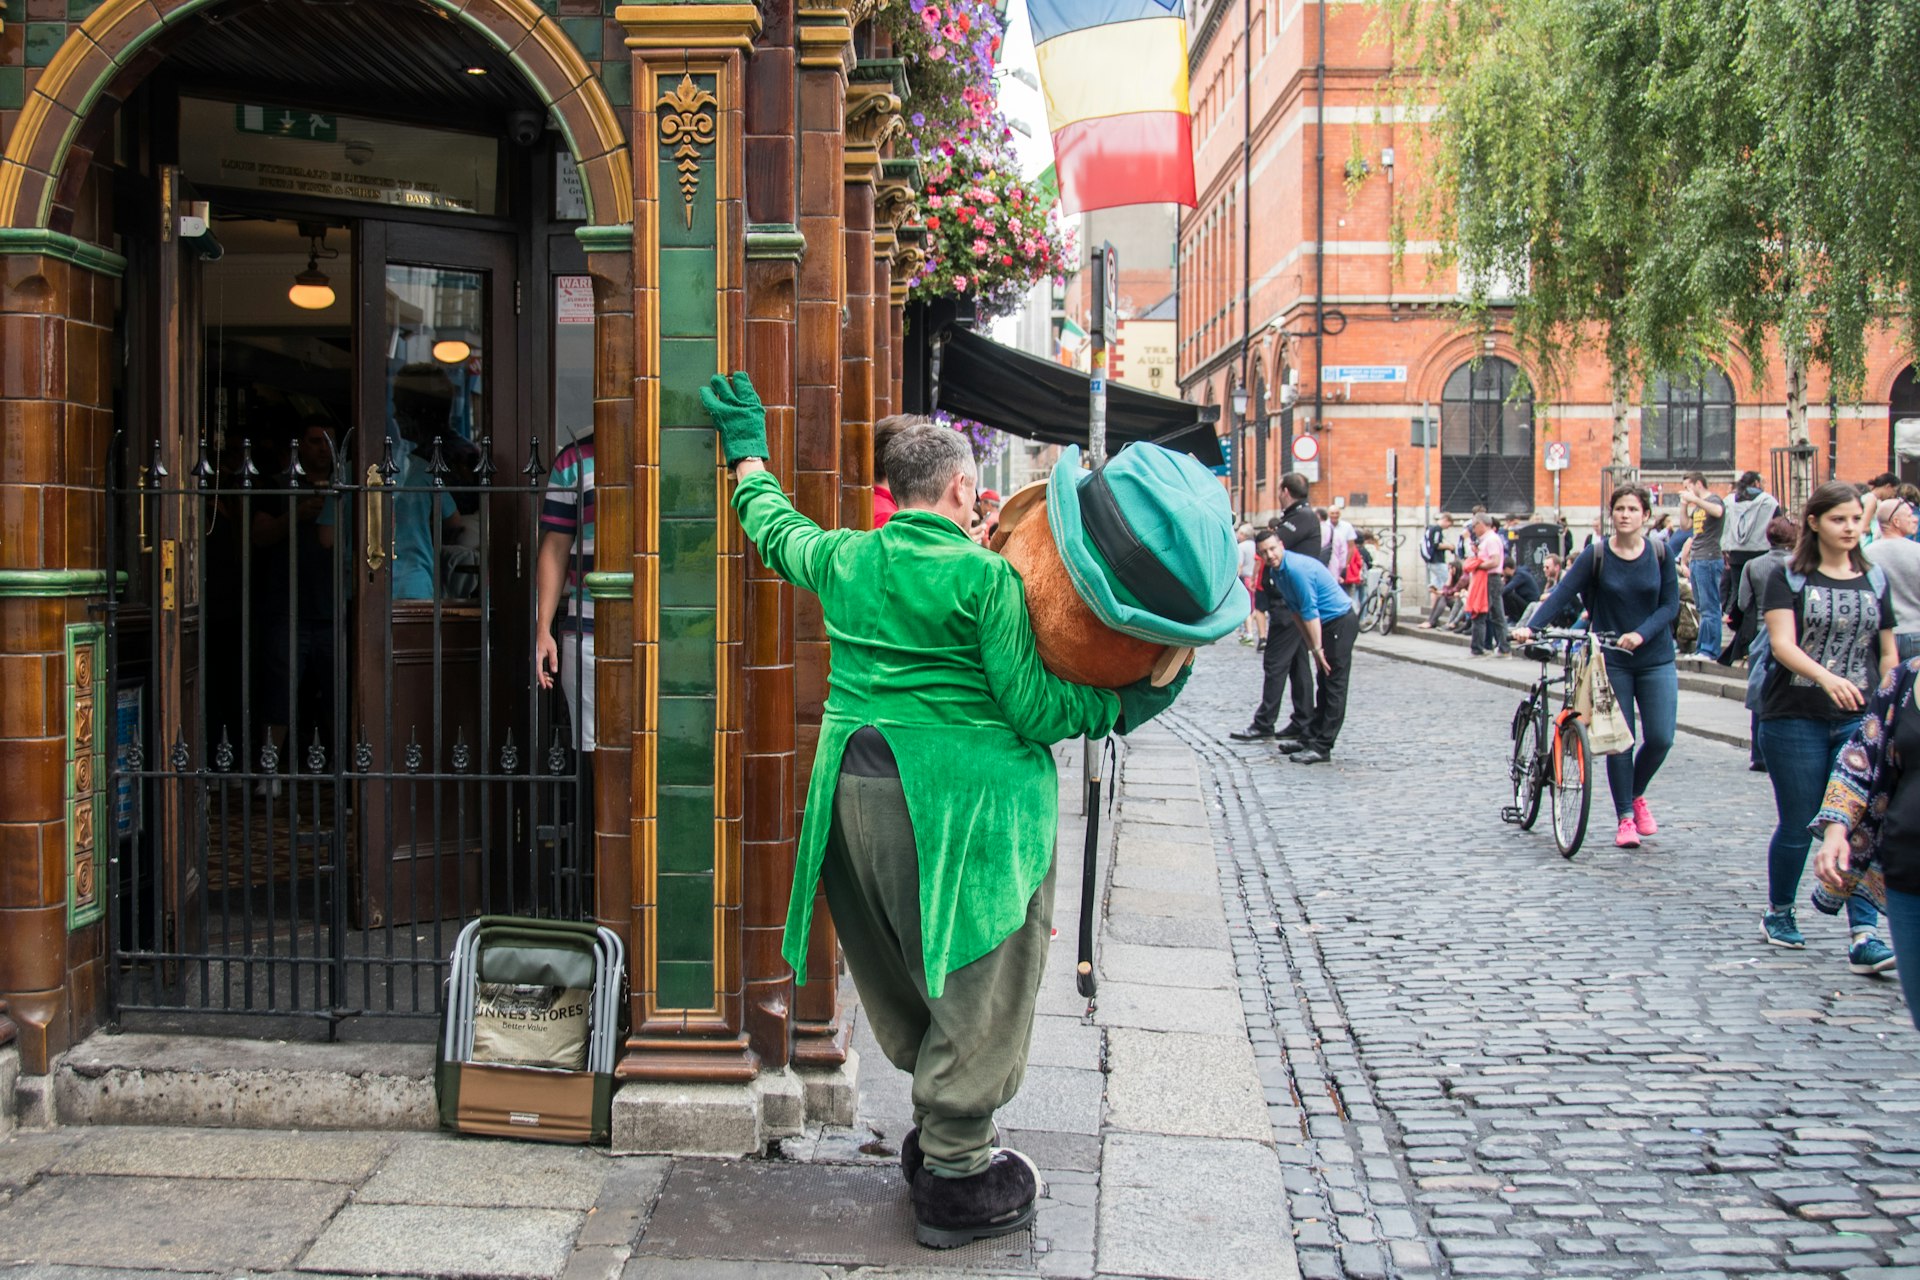 A man in a huge leprechaun outfit with his back to the camera, leaning against a tiled wall. The man has taken the giant head off the costume while he rests on the cobbled street